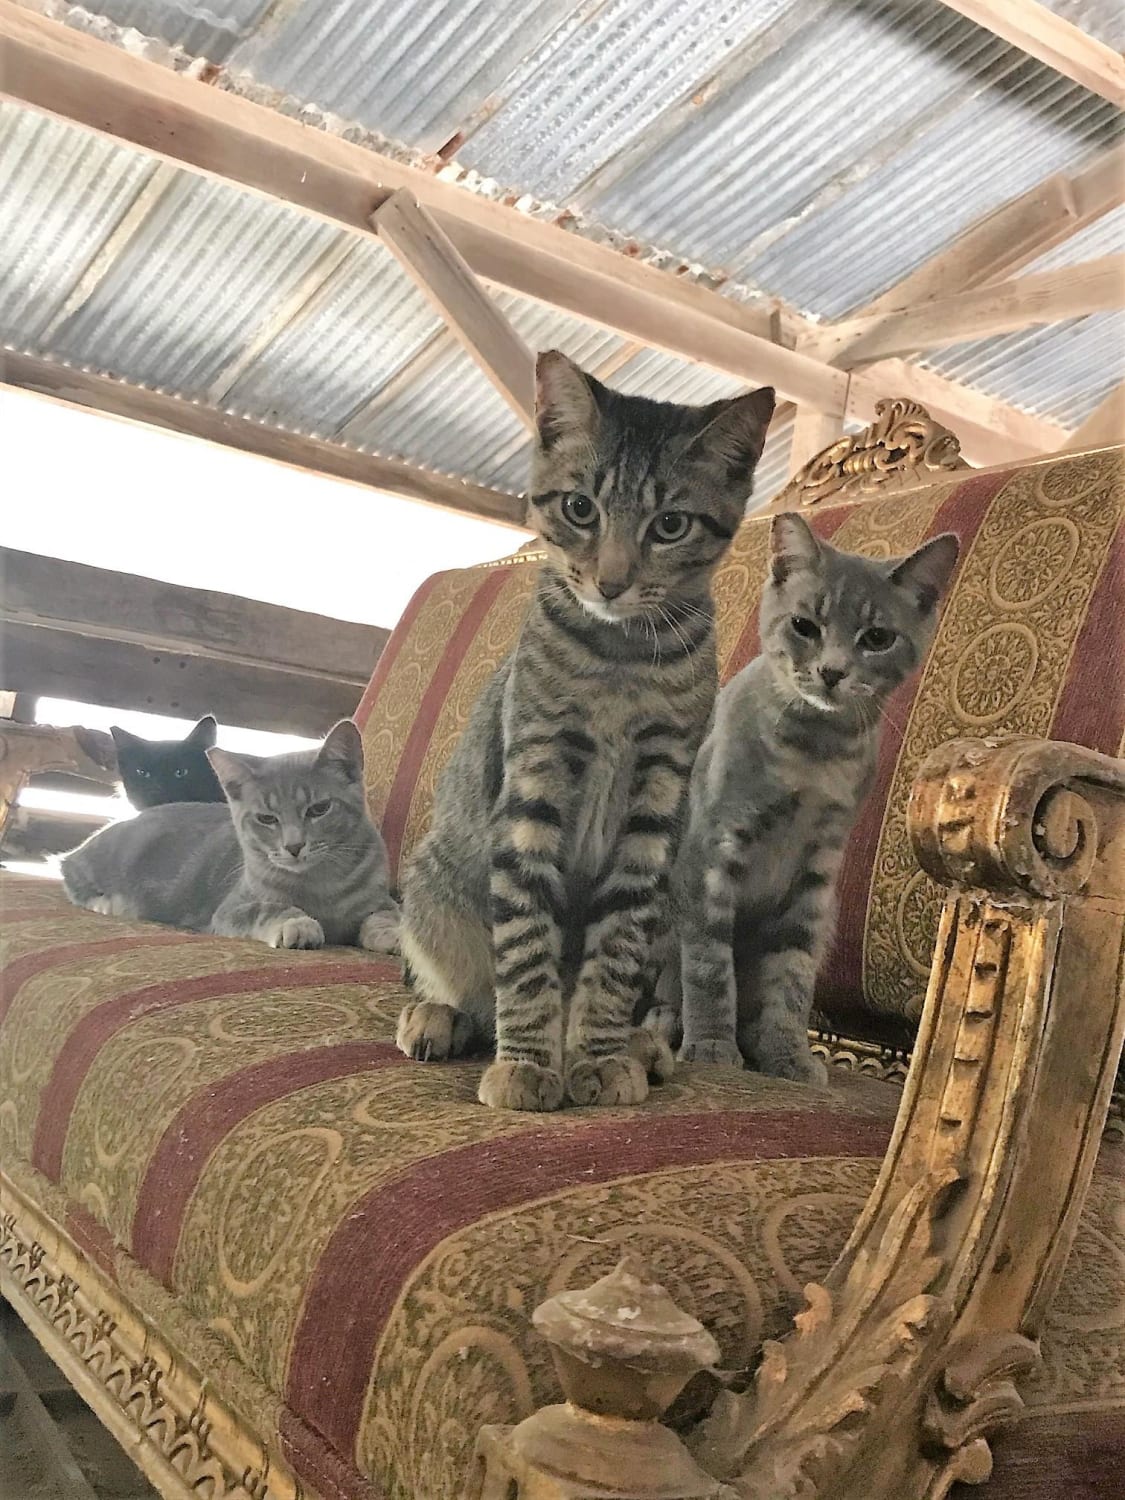 Feral barn kittens first day on the job.